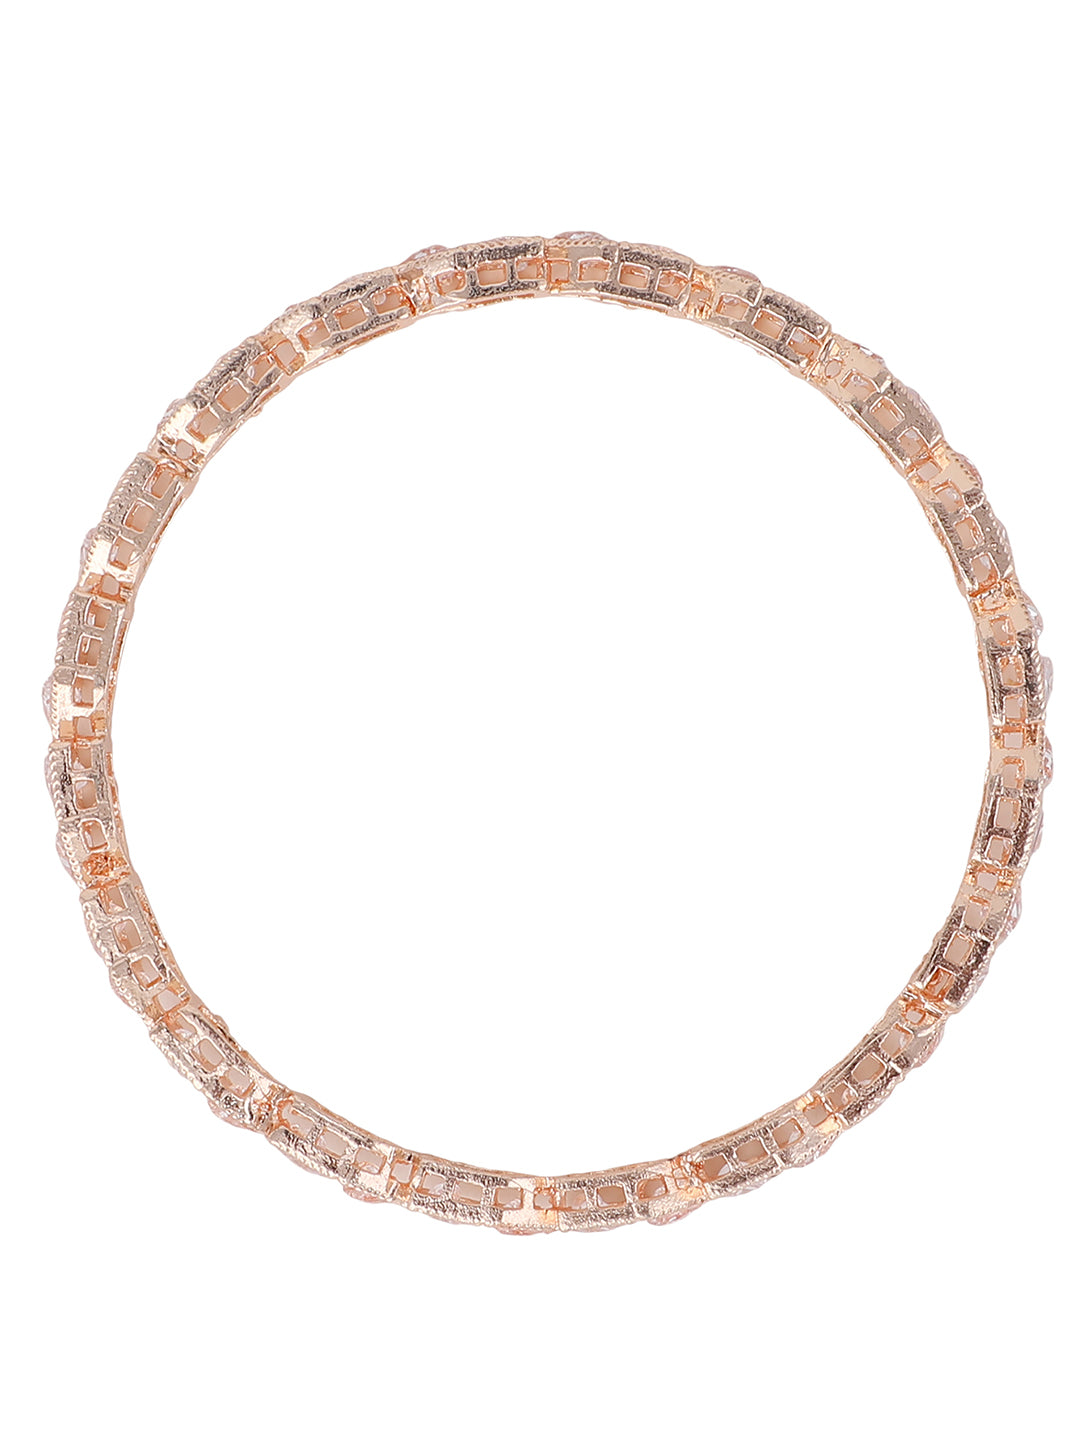 Women's Set Of 2 Rose Gold-Plated & White Ad-Studded Baguette Cut Bangles - Anikas Creation